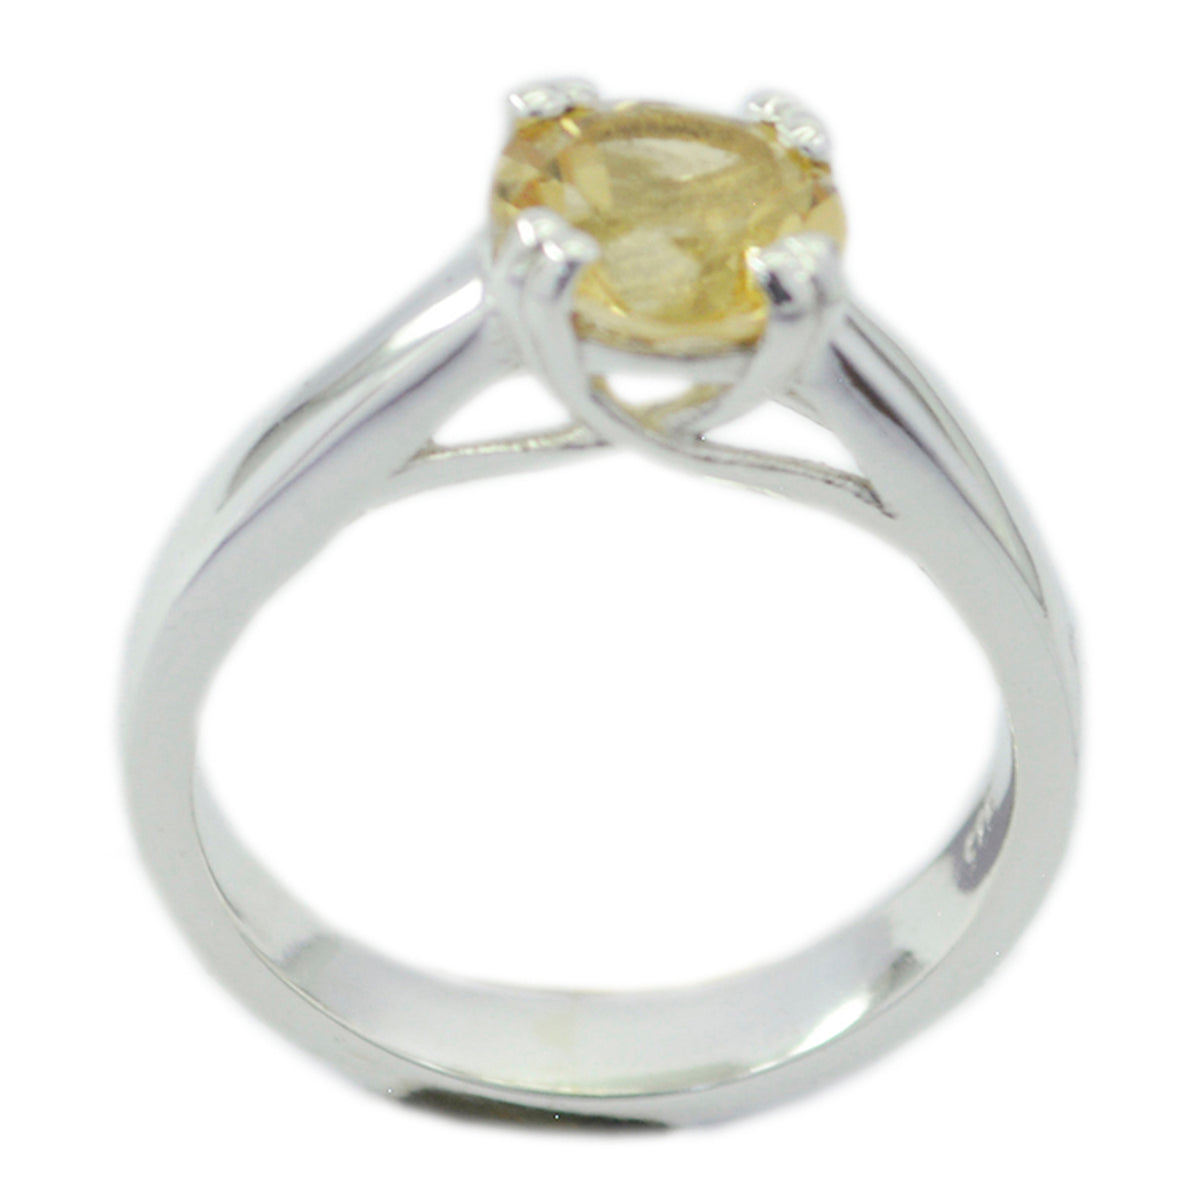 Grand Gemstones Citrine Sterling Silver Ring Small Jewelry Boxes